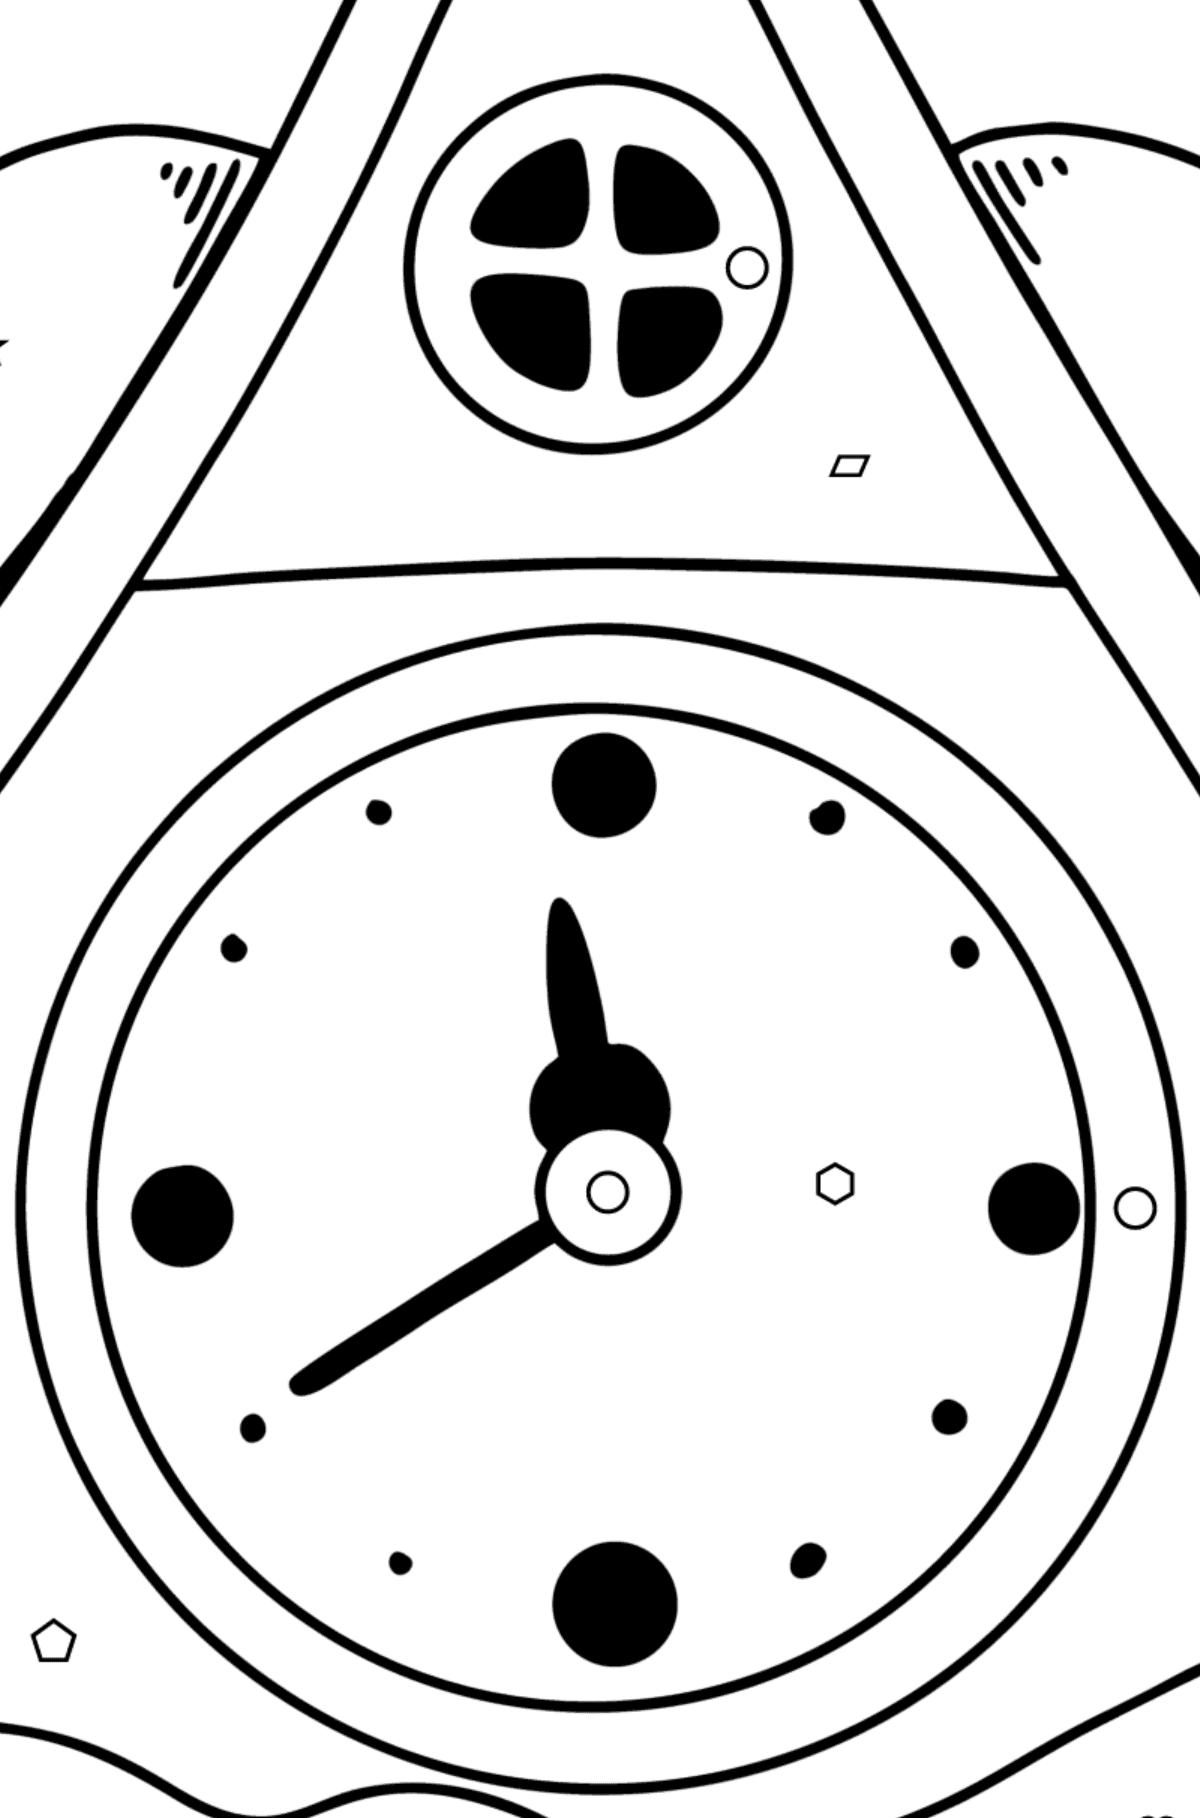 Christmas Clock coloring page - Coloring by Geometric Shapes for Kids